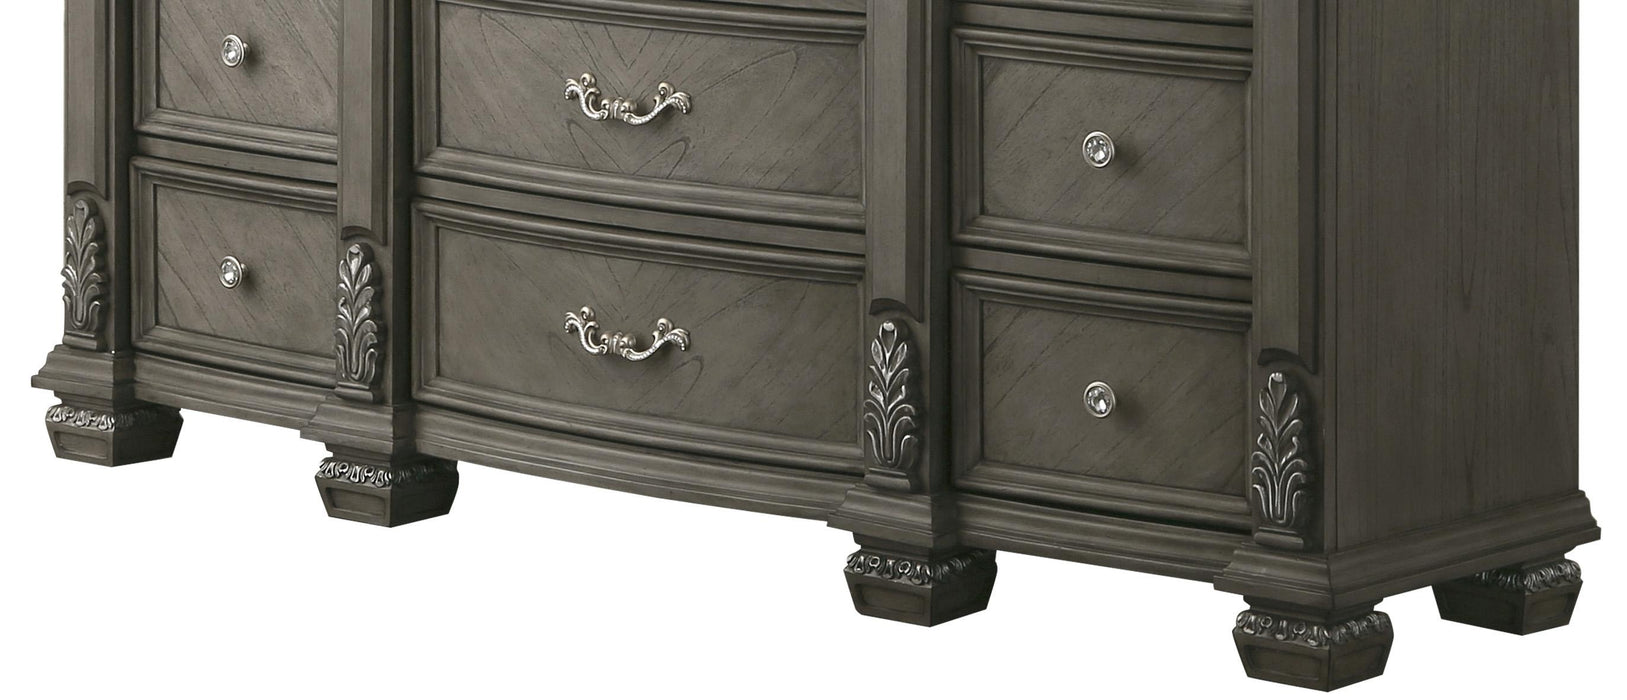 Silvy Transitional Style Dresser in Gray finish Wood